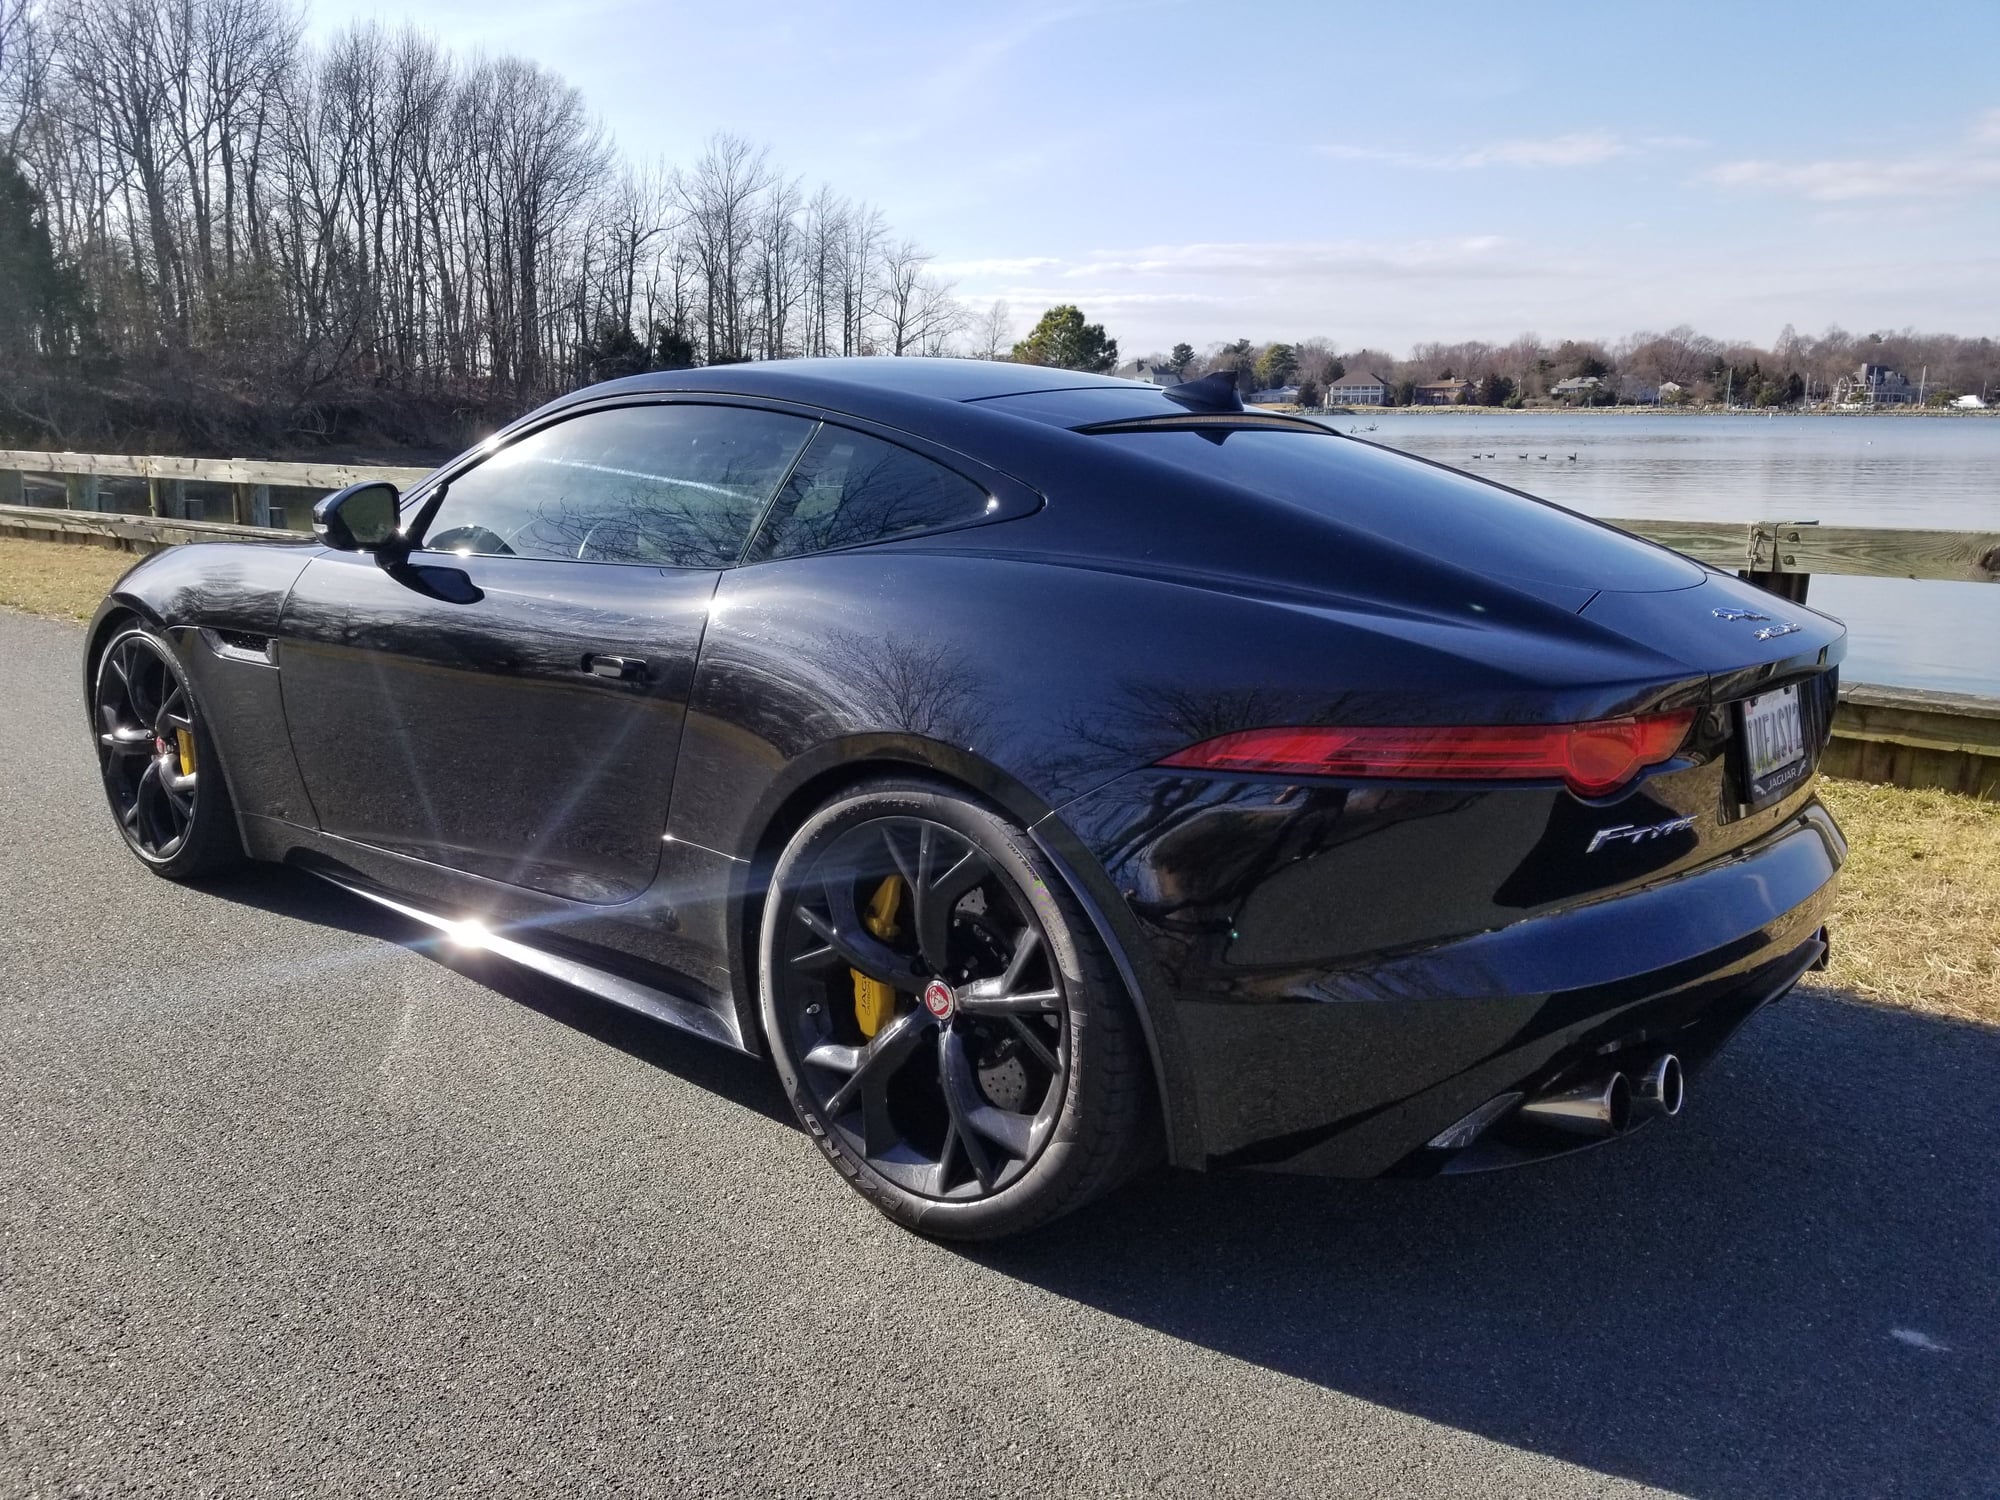 2015 Jaguar F-Type - 2015 Jaguar F-Type R V8 Coupe. w/ Ceramic Brakes and Project 7 Wheels - Used - VIN SAJWA6DA4FMK10634 - 22,000 Miles - 8 cyl - 2WD - Automatic - Coupe - Black - Annapolis, MD 21403, United States